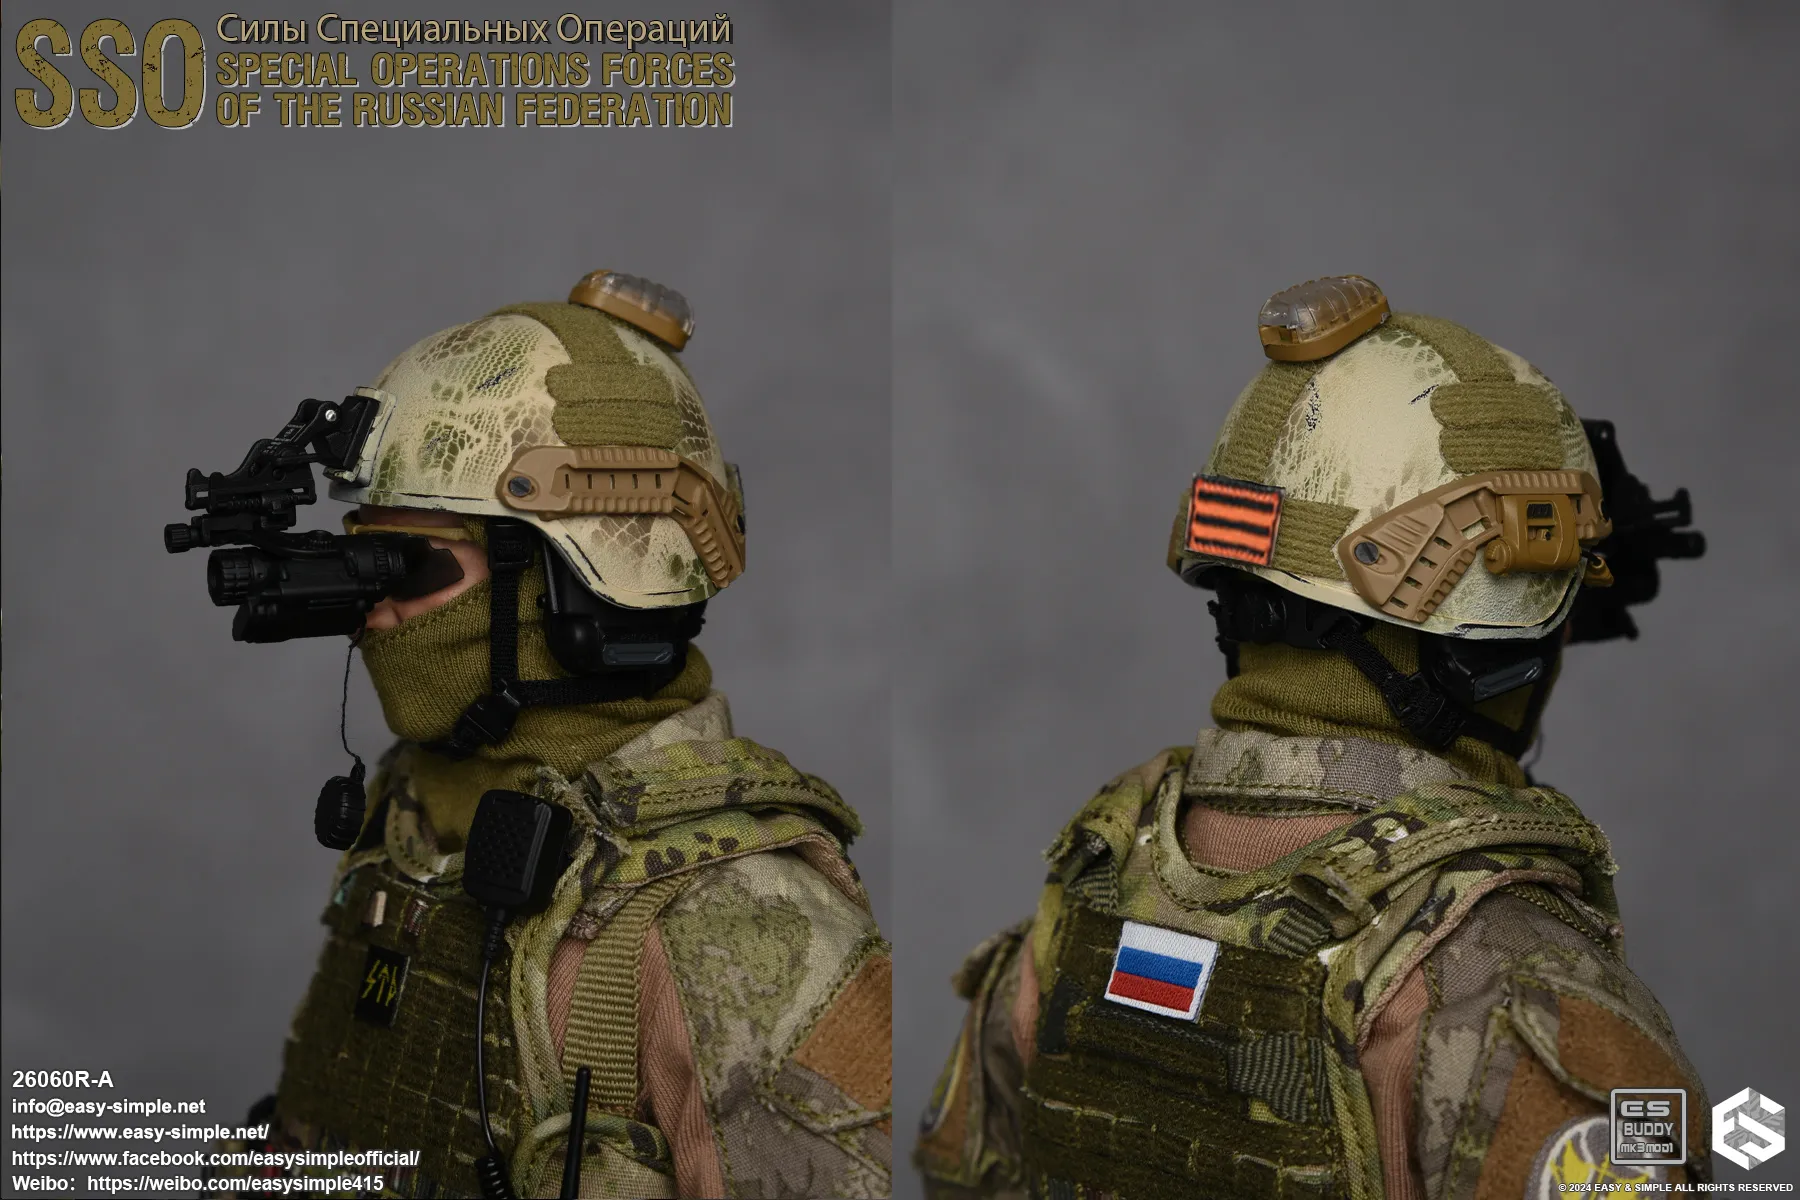 military - NEW PRODUCT: Easy&Simple 26060R-A Russian Special Operations Forces (SSO) Format,webp